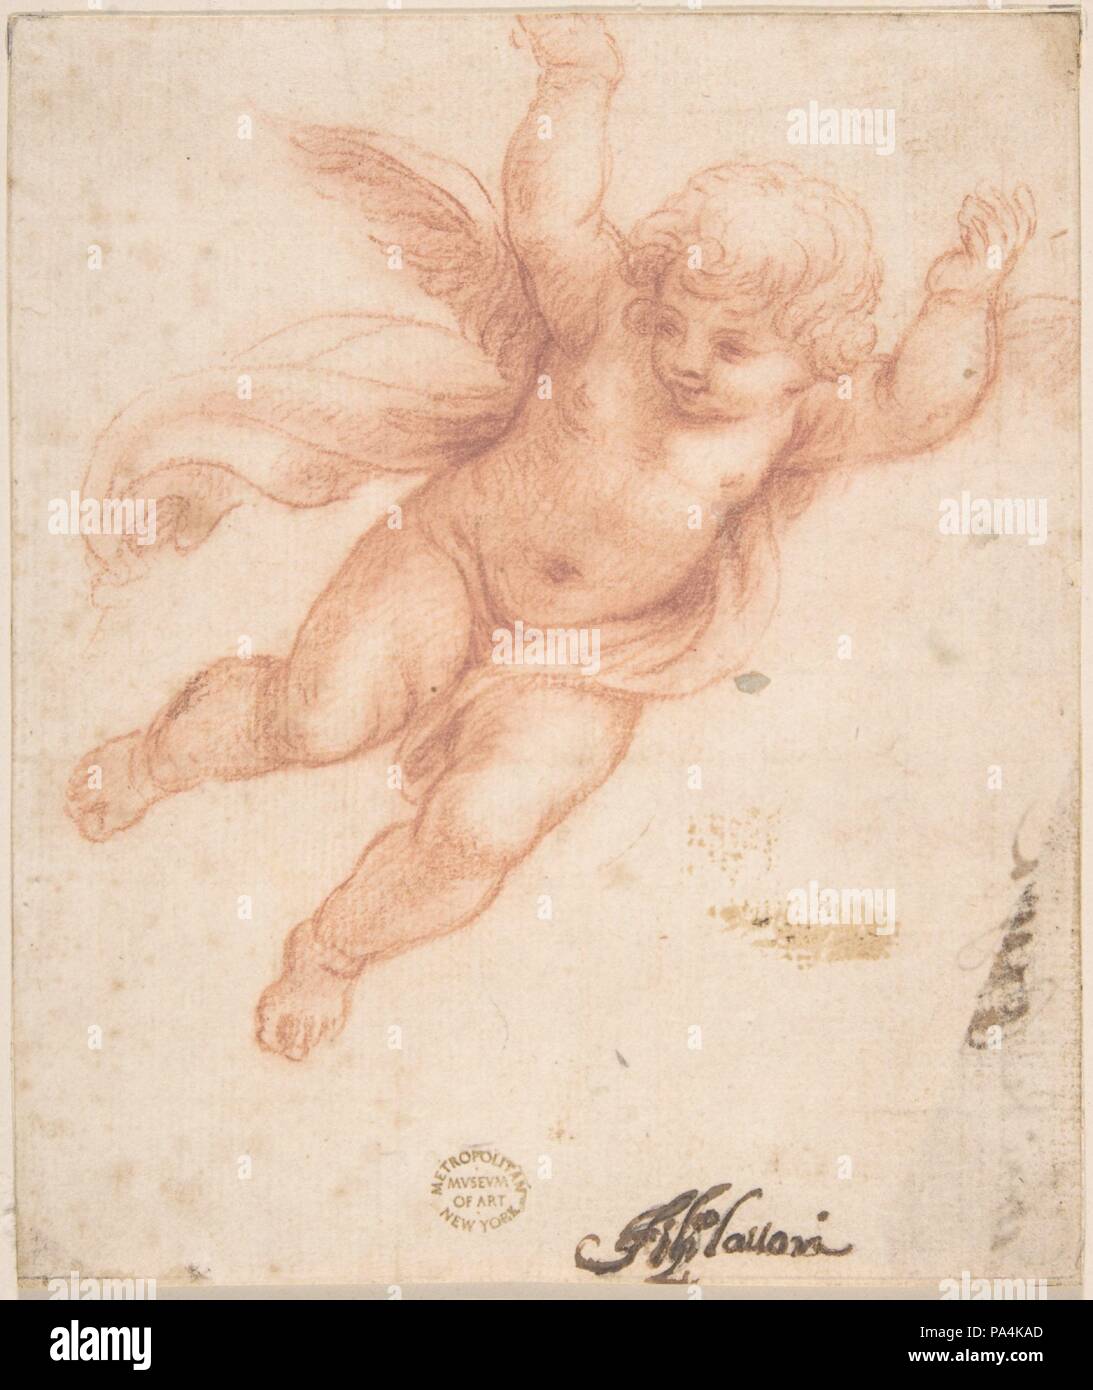 Putto. Artist: Anonymous, Italian, Roman-Bolognese, 17th century. Dimensions: 5-7/8 x 5 in.  (14.9 x 12.7 cm). Date: 17th century. Museum: Metropolitan Museum of Art, New York, USA. Stock Photo